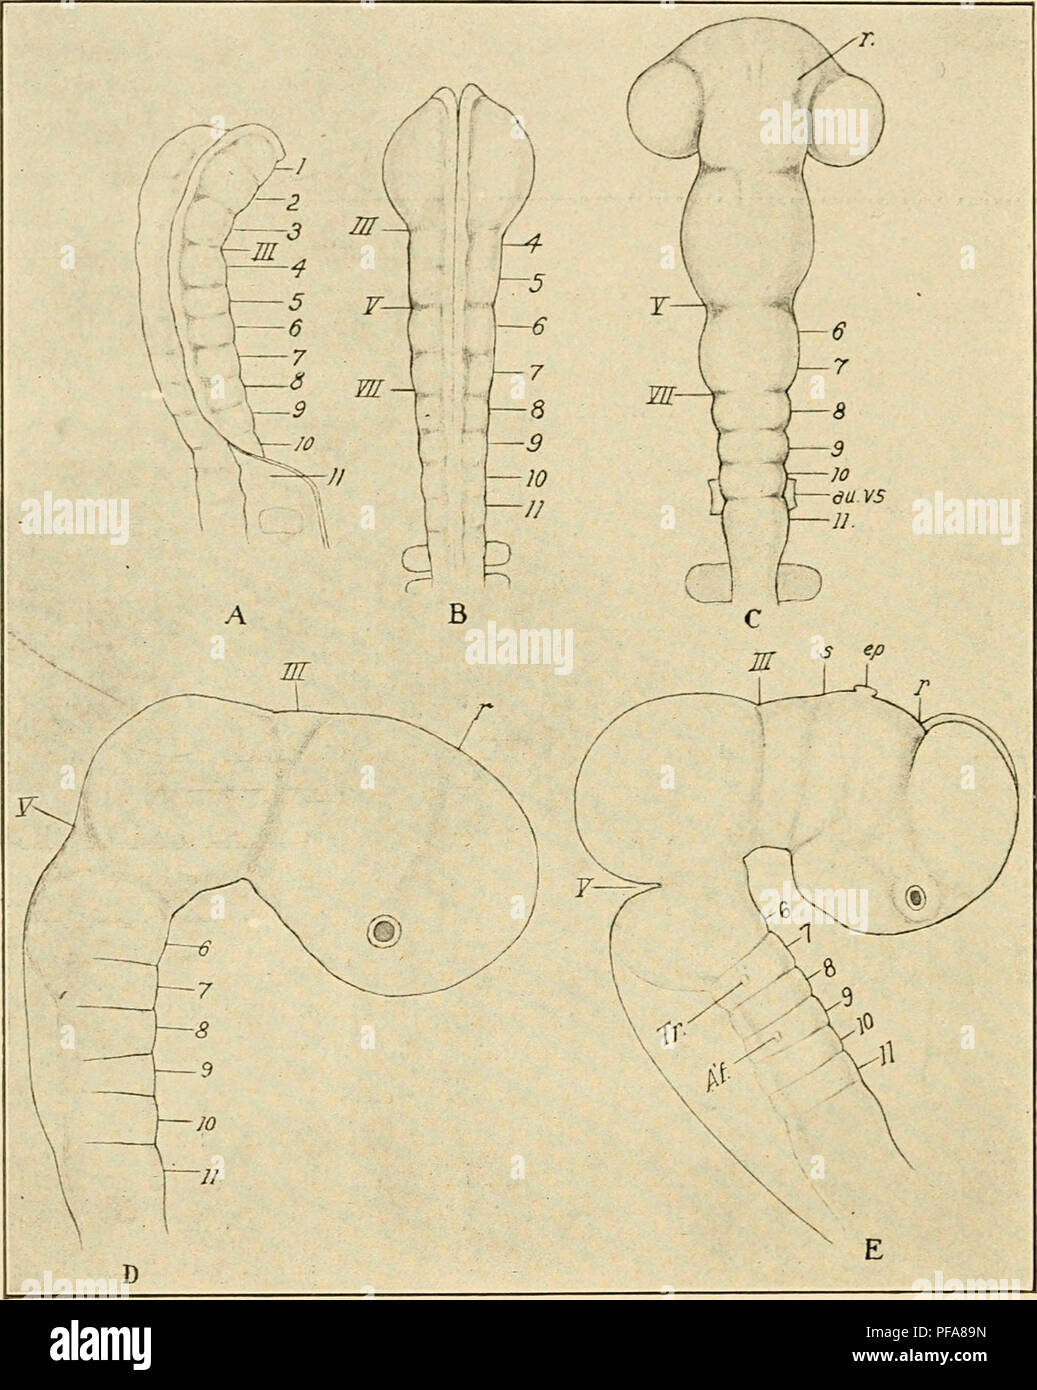 . The development of the chick; an introduction to embryology. Birds -- Embryology. 148 THE DEVELOPMENT OF THE CHICK. Fig. 83. — Five stages in the history of the neuromeres of the brain of the chick. (After Hill.) All figures drawn from preparations of the embryonic brain dissected out of the embryo. A. Neural groove in an embryo with 4 somites. Right profile view, x 44. B. Brain of a 7 s embryo, 26 hours old. Dorsal view; the three anterior neuromeres are practically obliterated, x 44. C. Brain of 14 s embryo. Dorsal view, x 44. The neuromeres have now disappeared in the mid-brain region. D. Stock Photo